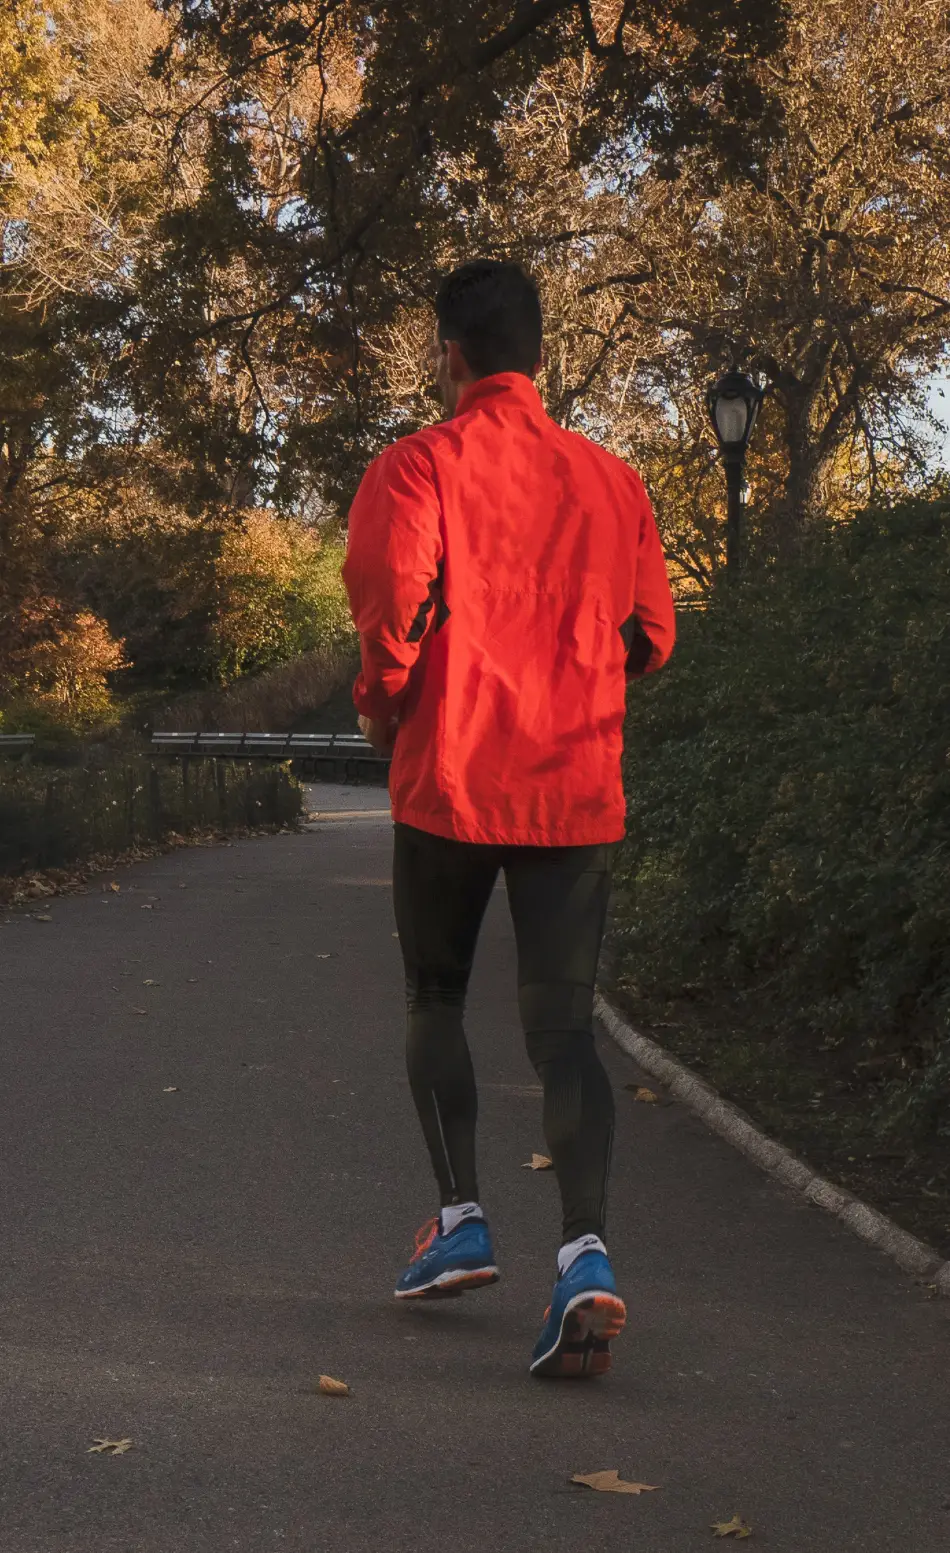 Back view of a man running through the park. He is wearing a red jacket and black full length leggings and blue running shoes.